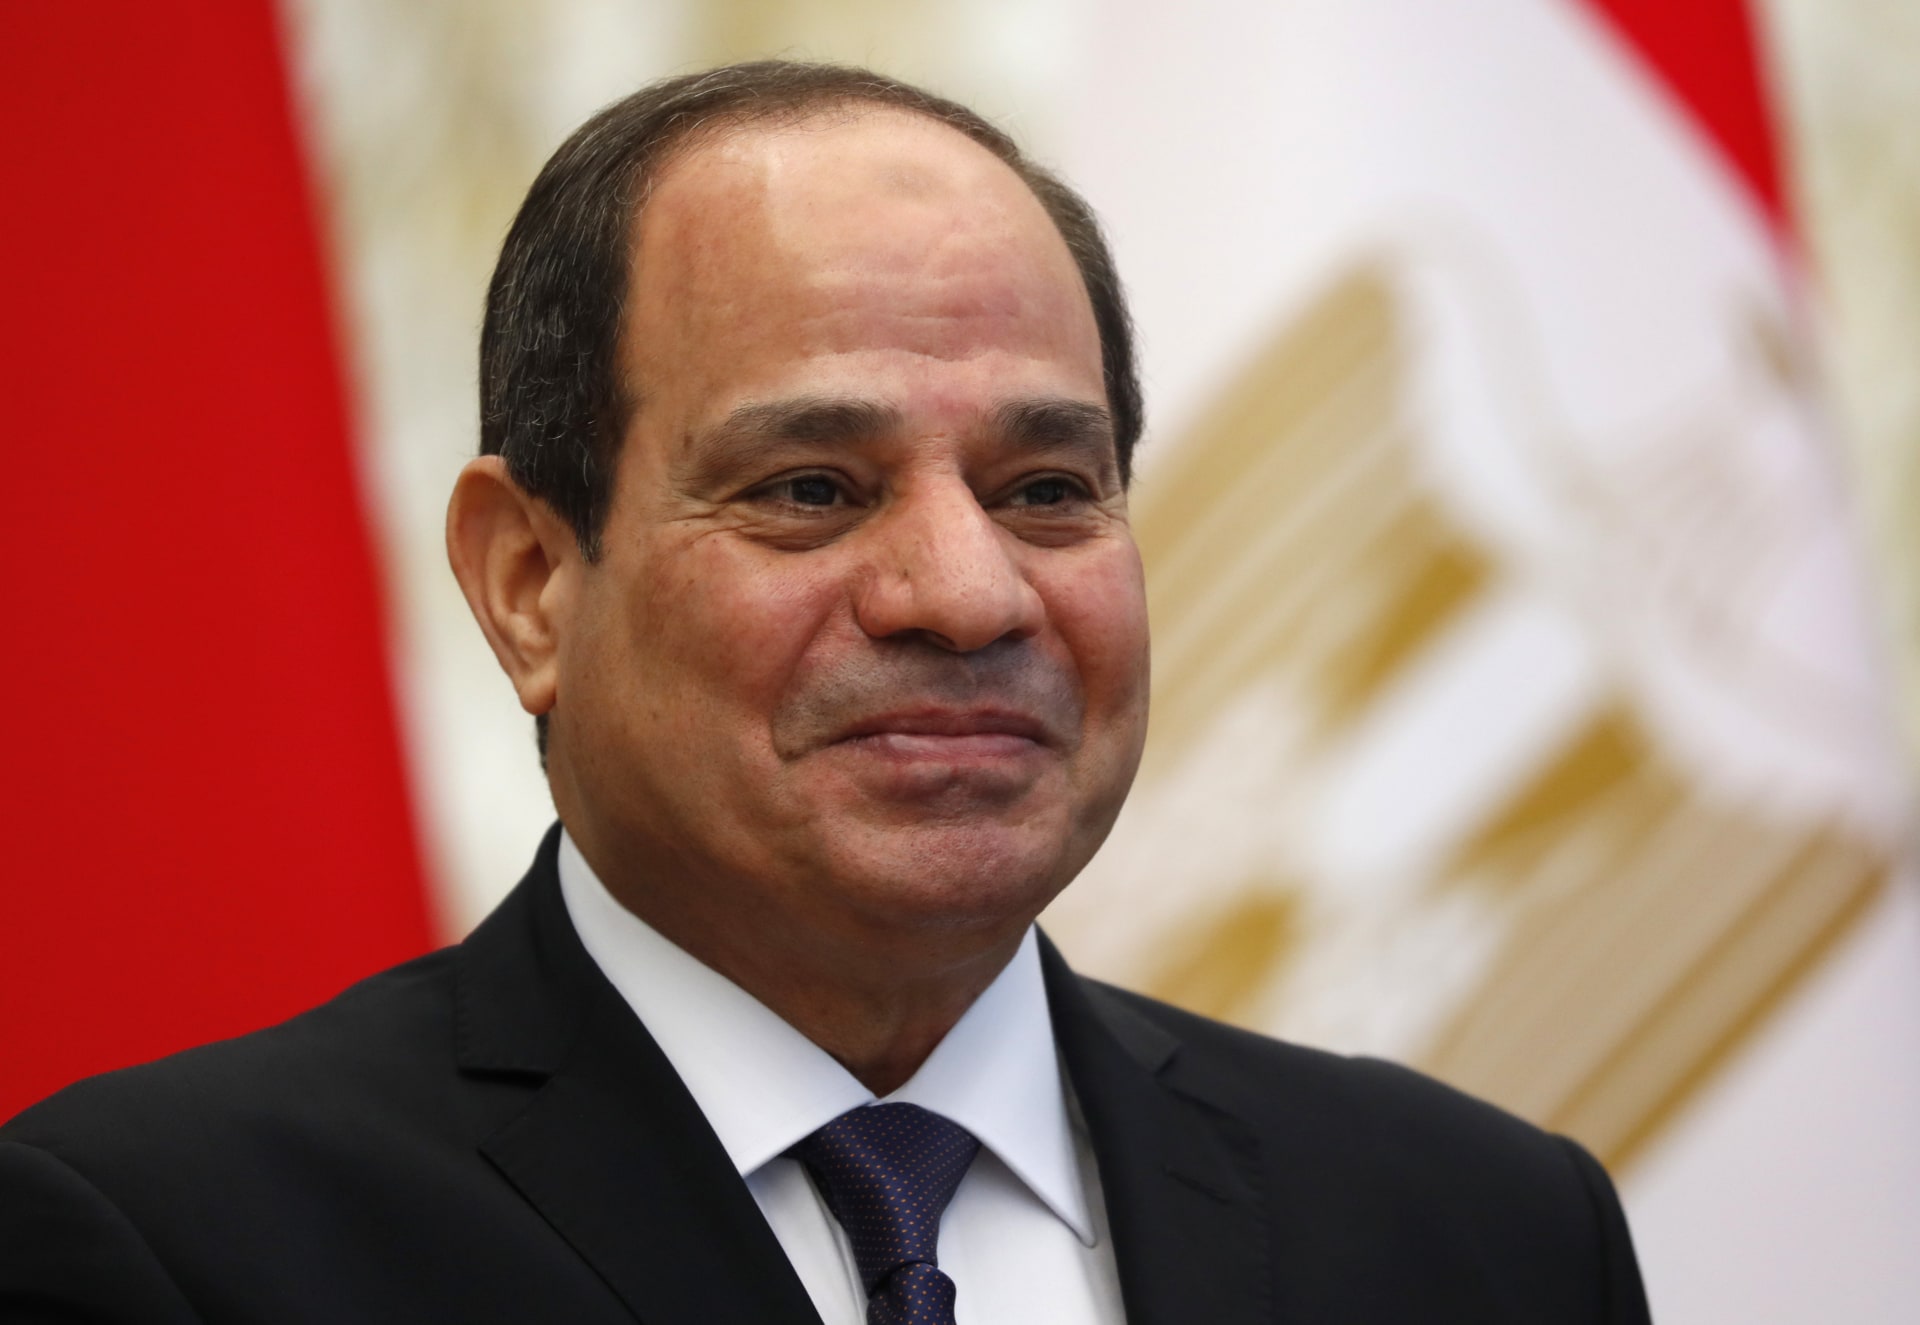 President El-Sisi exchanges congratulations with the kings, presidents and princes of Arab and Islamic countries on the occasion of the holy month of Ramadan